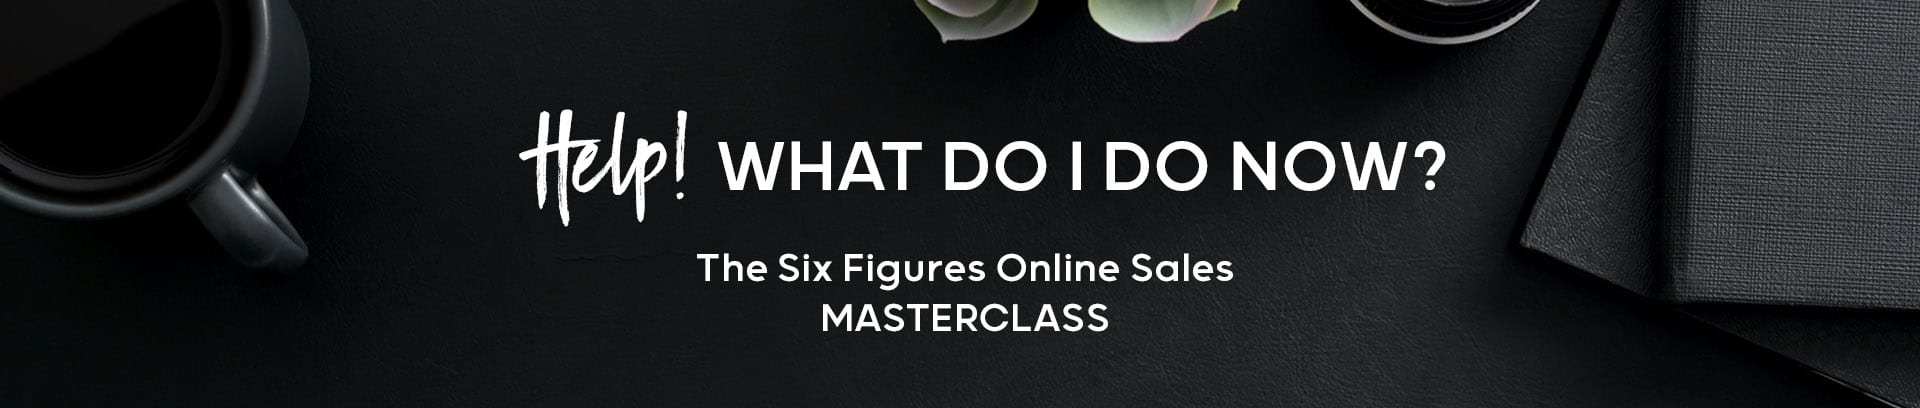 Help - what to do now masterclass